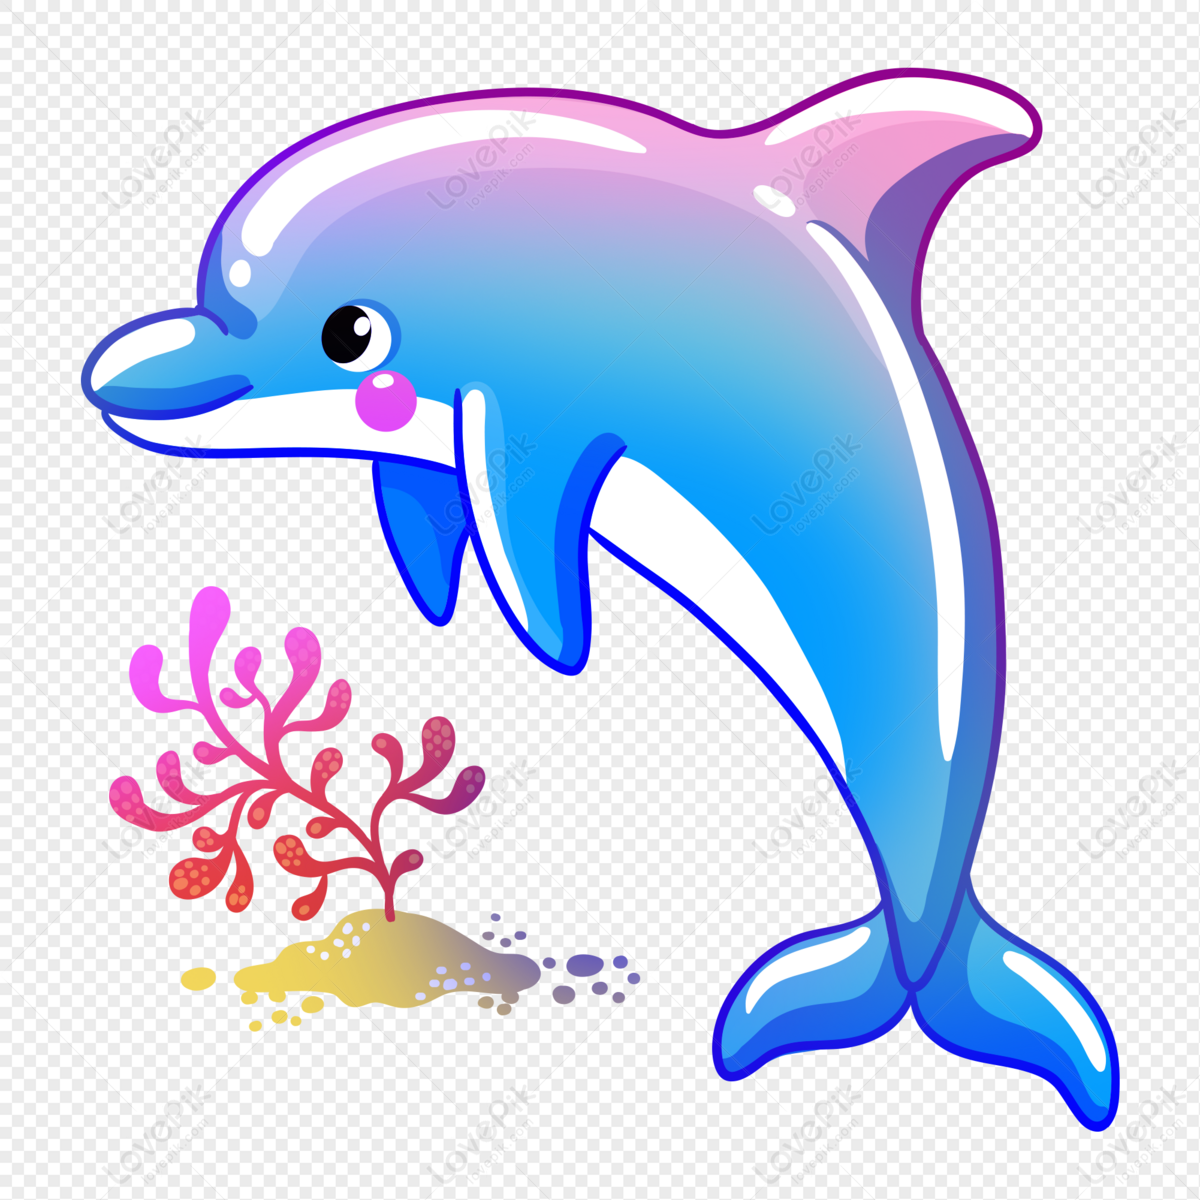 Cartoon Dolphin Underwater Element Illustration Free PNG And Clipart Image  For Free Download - Lovepik | 401542959